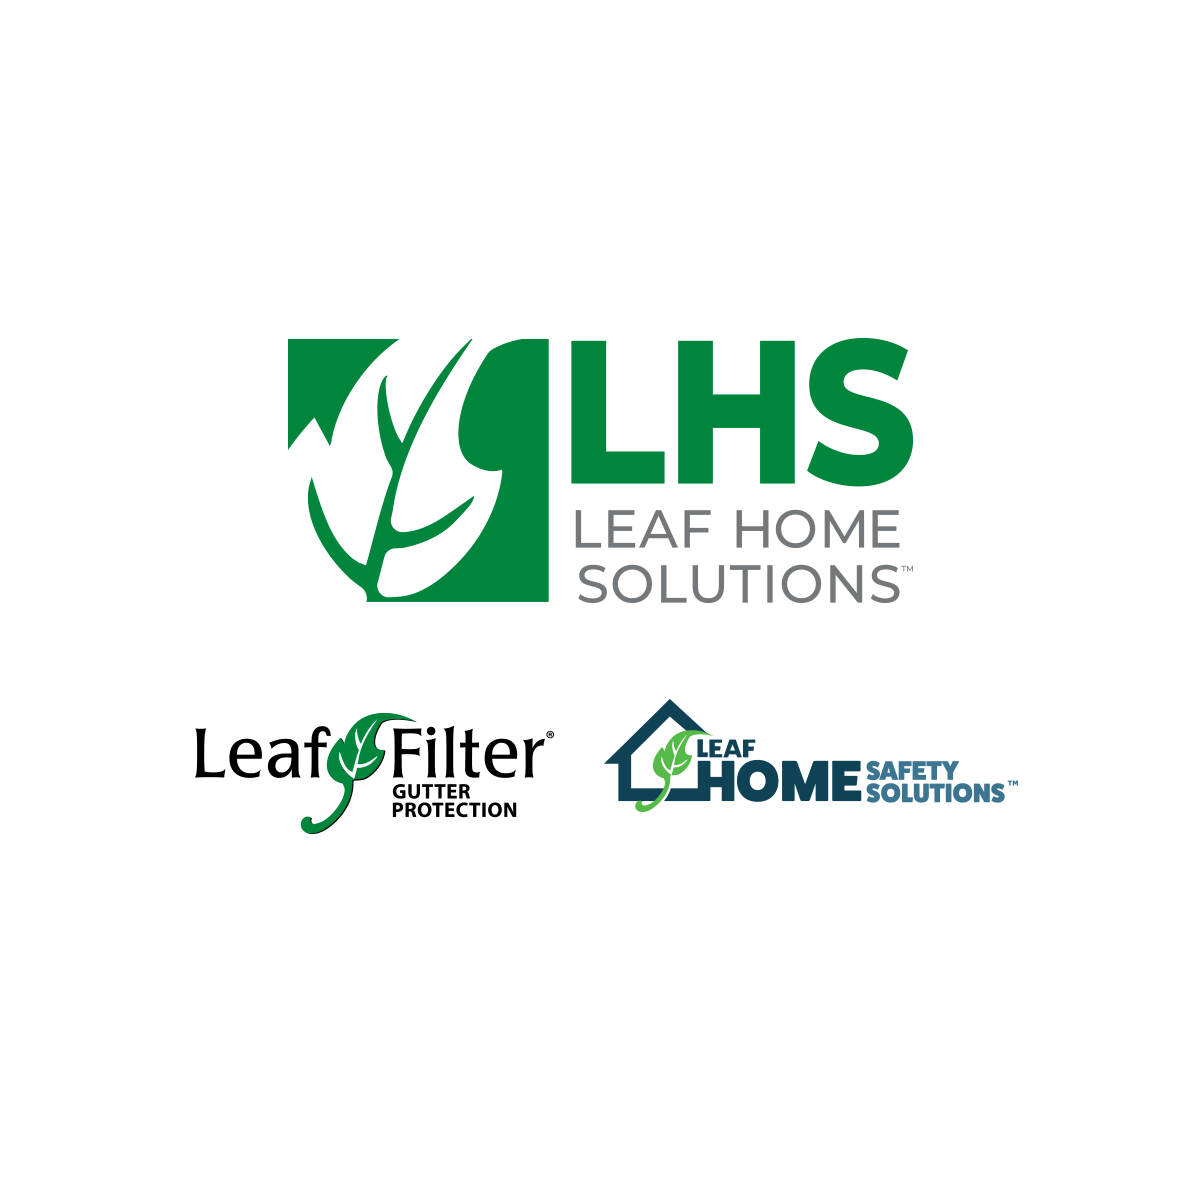 Three stacked icons for Leaf Home Solutions, LeafFilter Gutter Protection, and Leaf Home Safety Solutions.